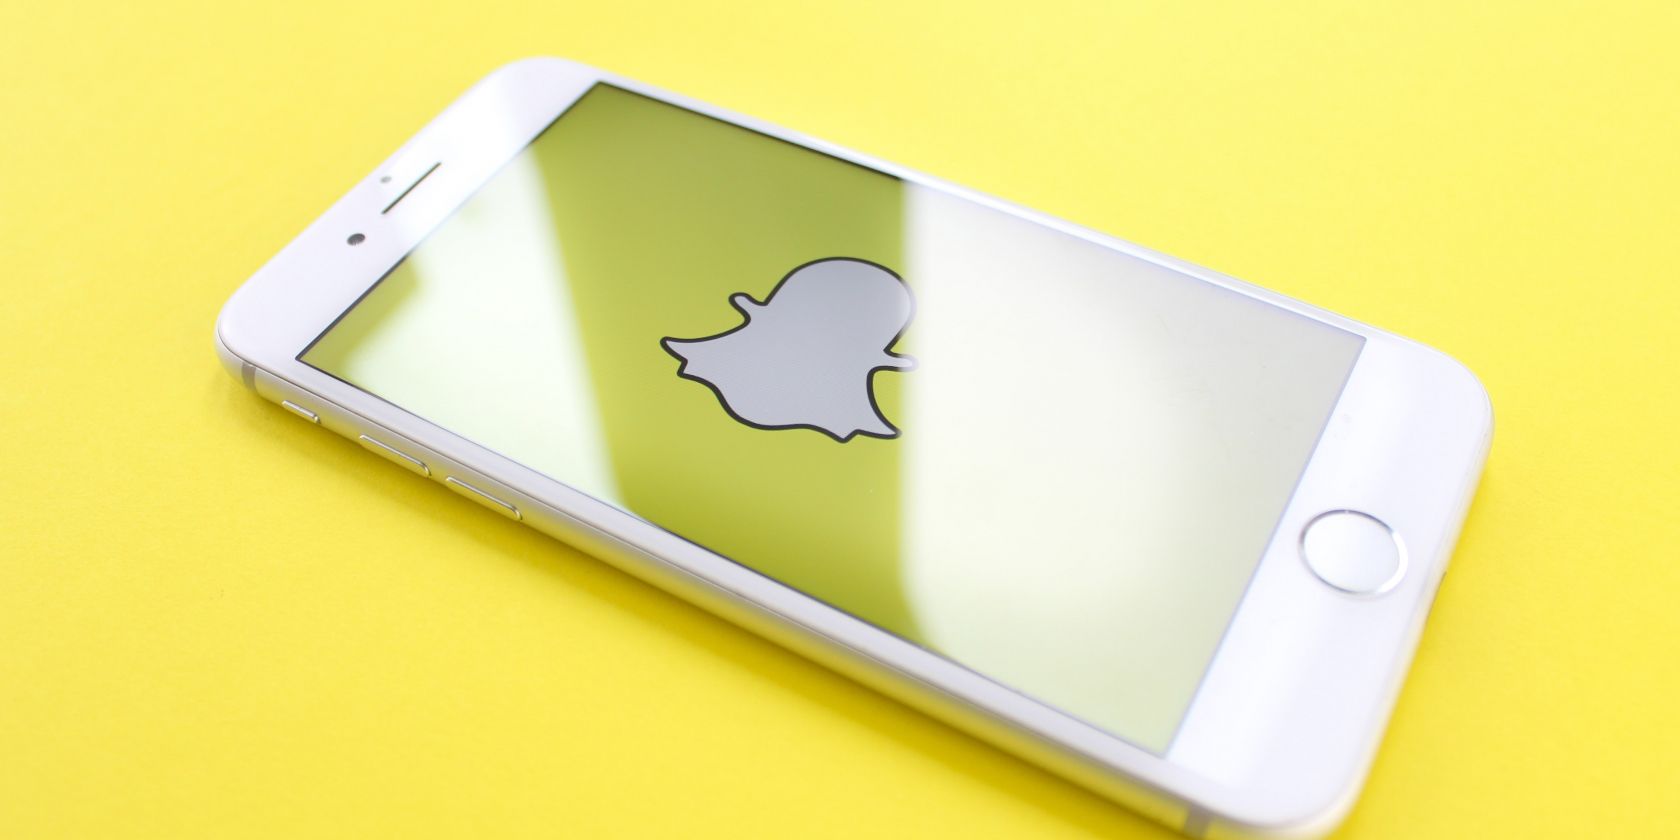 Photo of a phone with the Snapchat logo showing